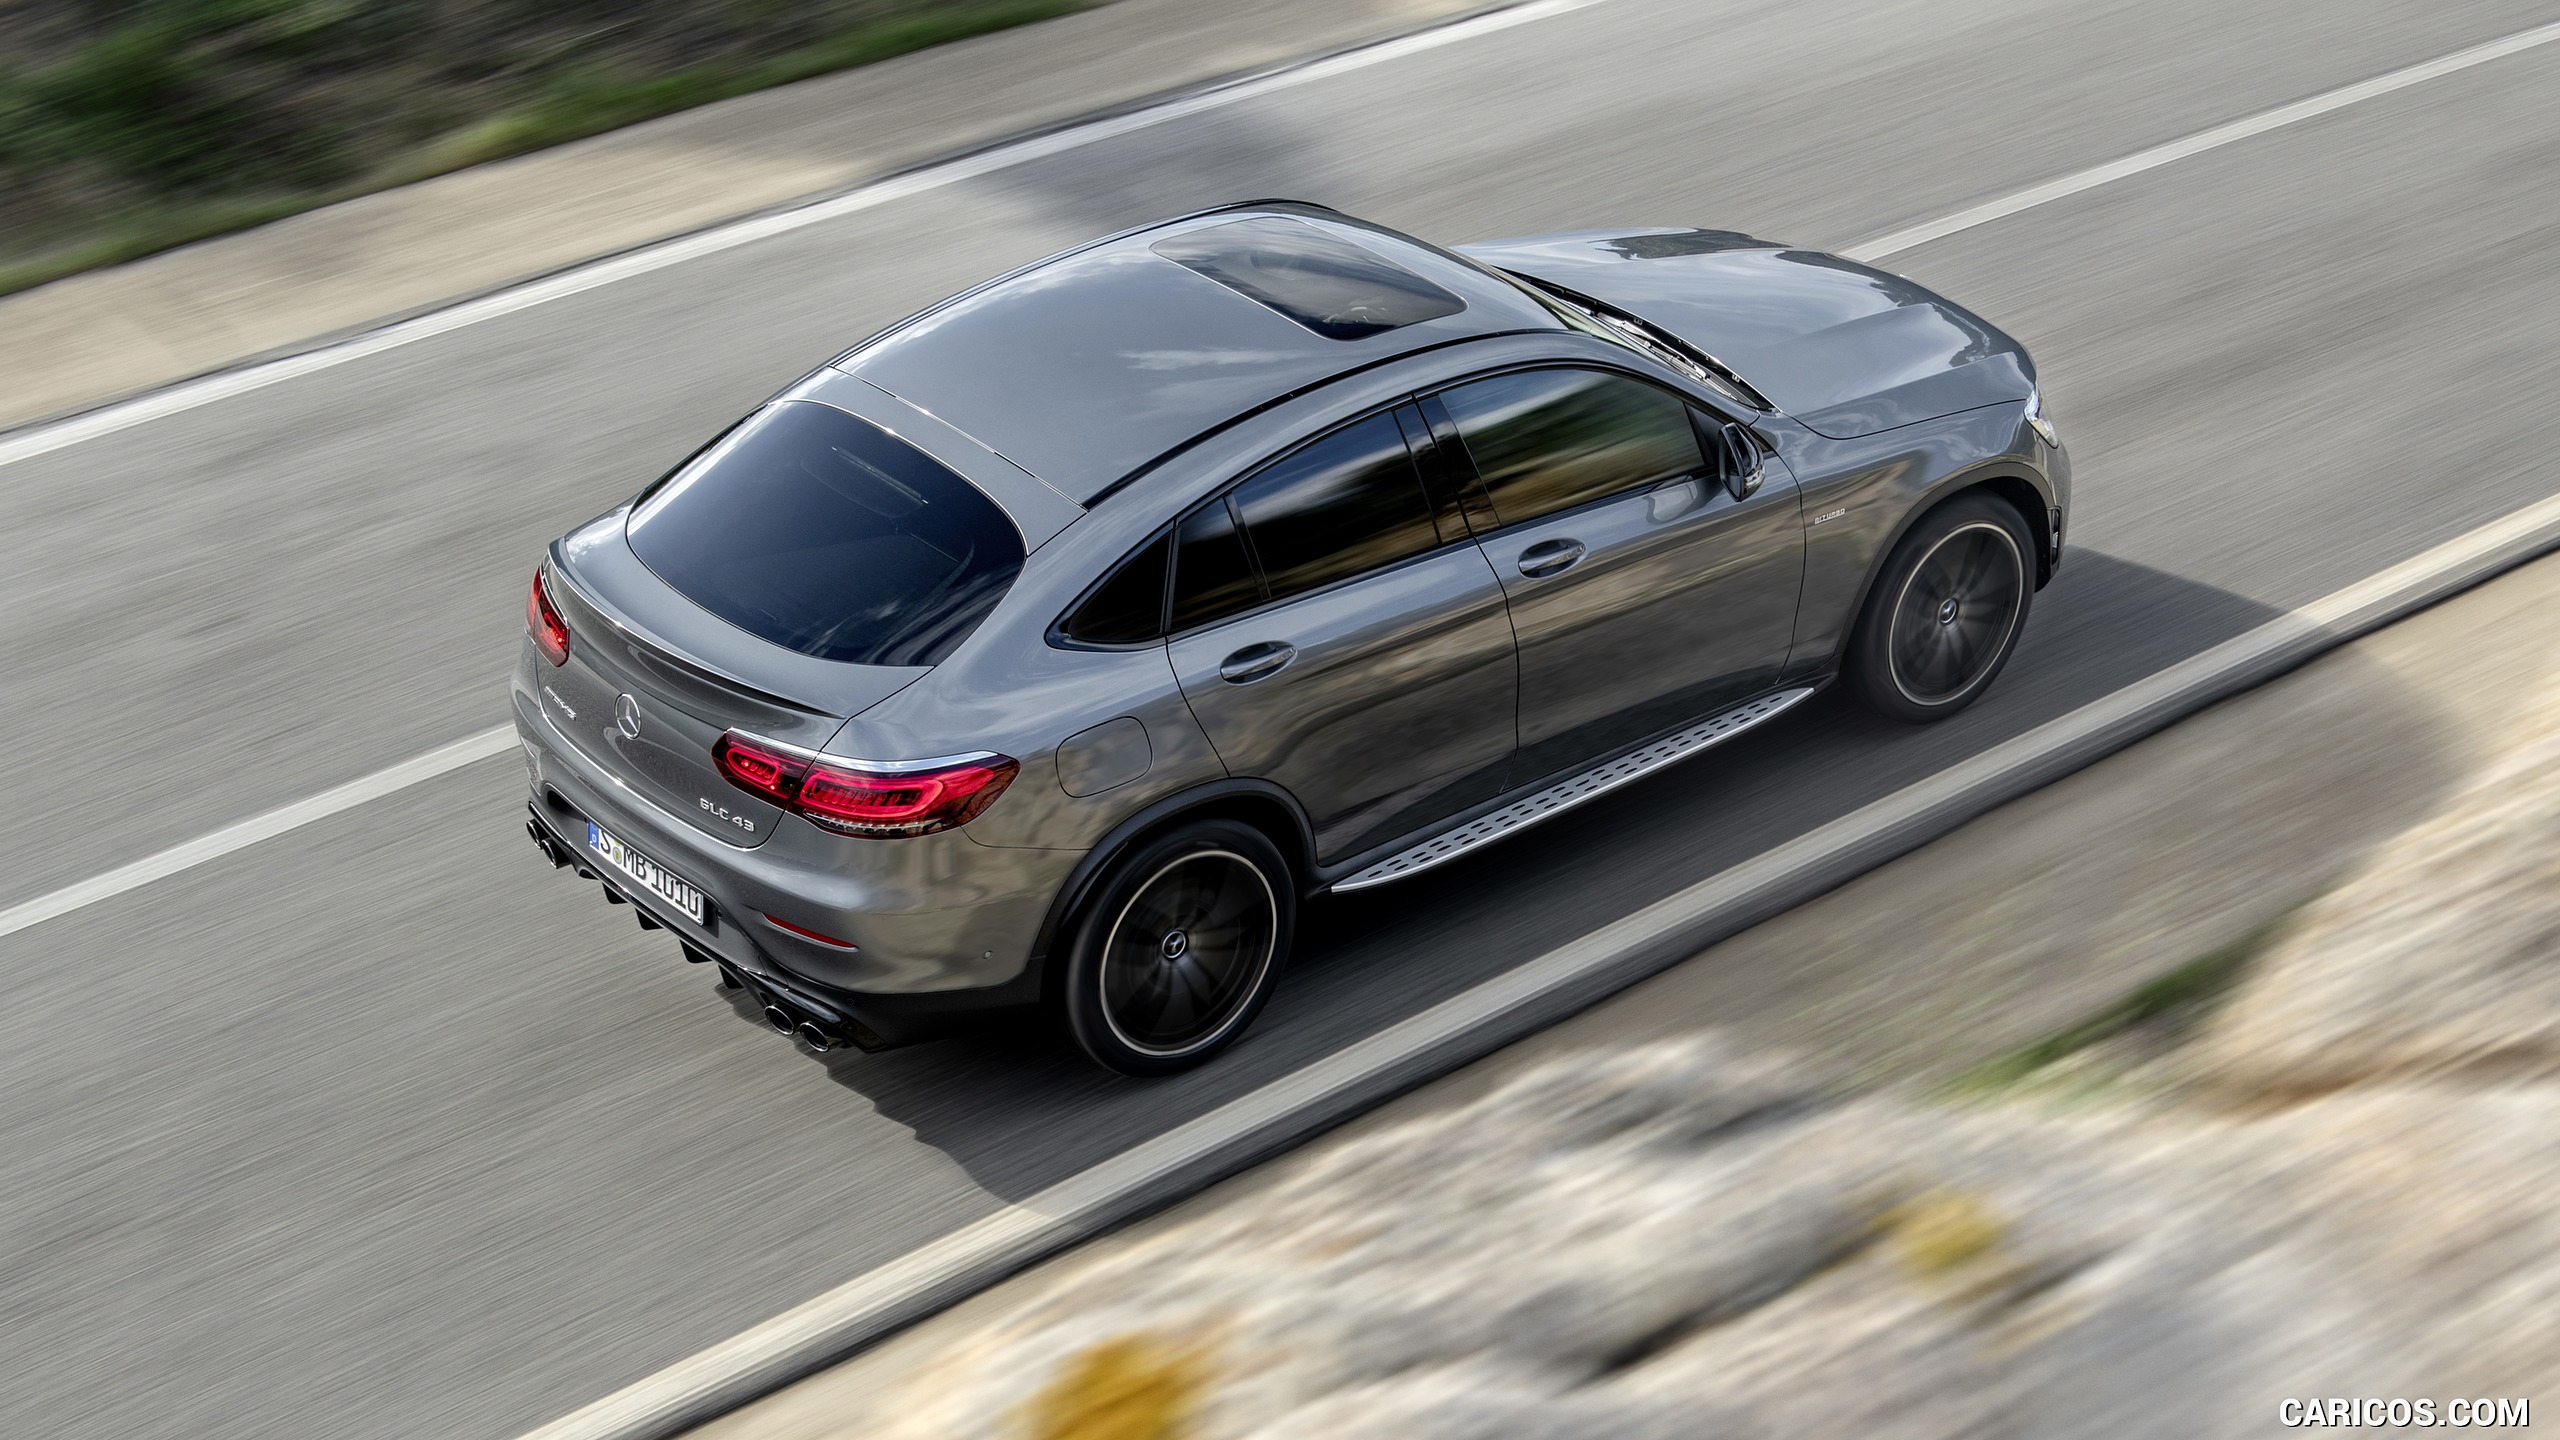 2020 Mercedes-AMG GLC 43 4MATIC Coupe - Top, #9 of 173